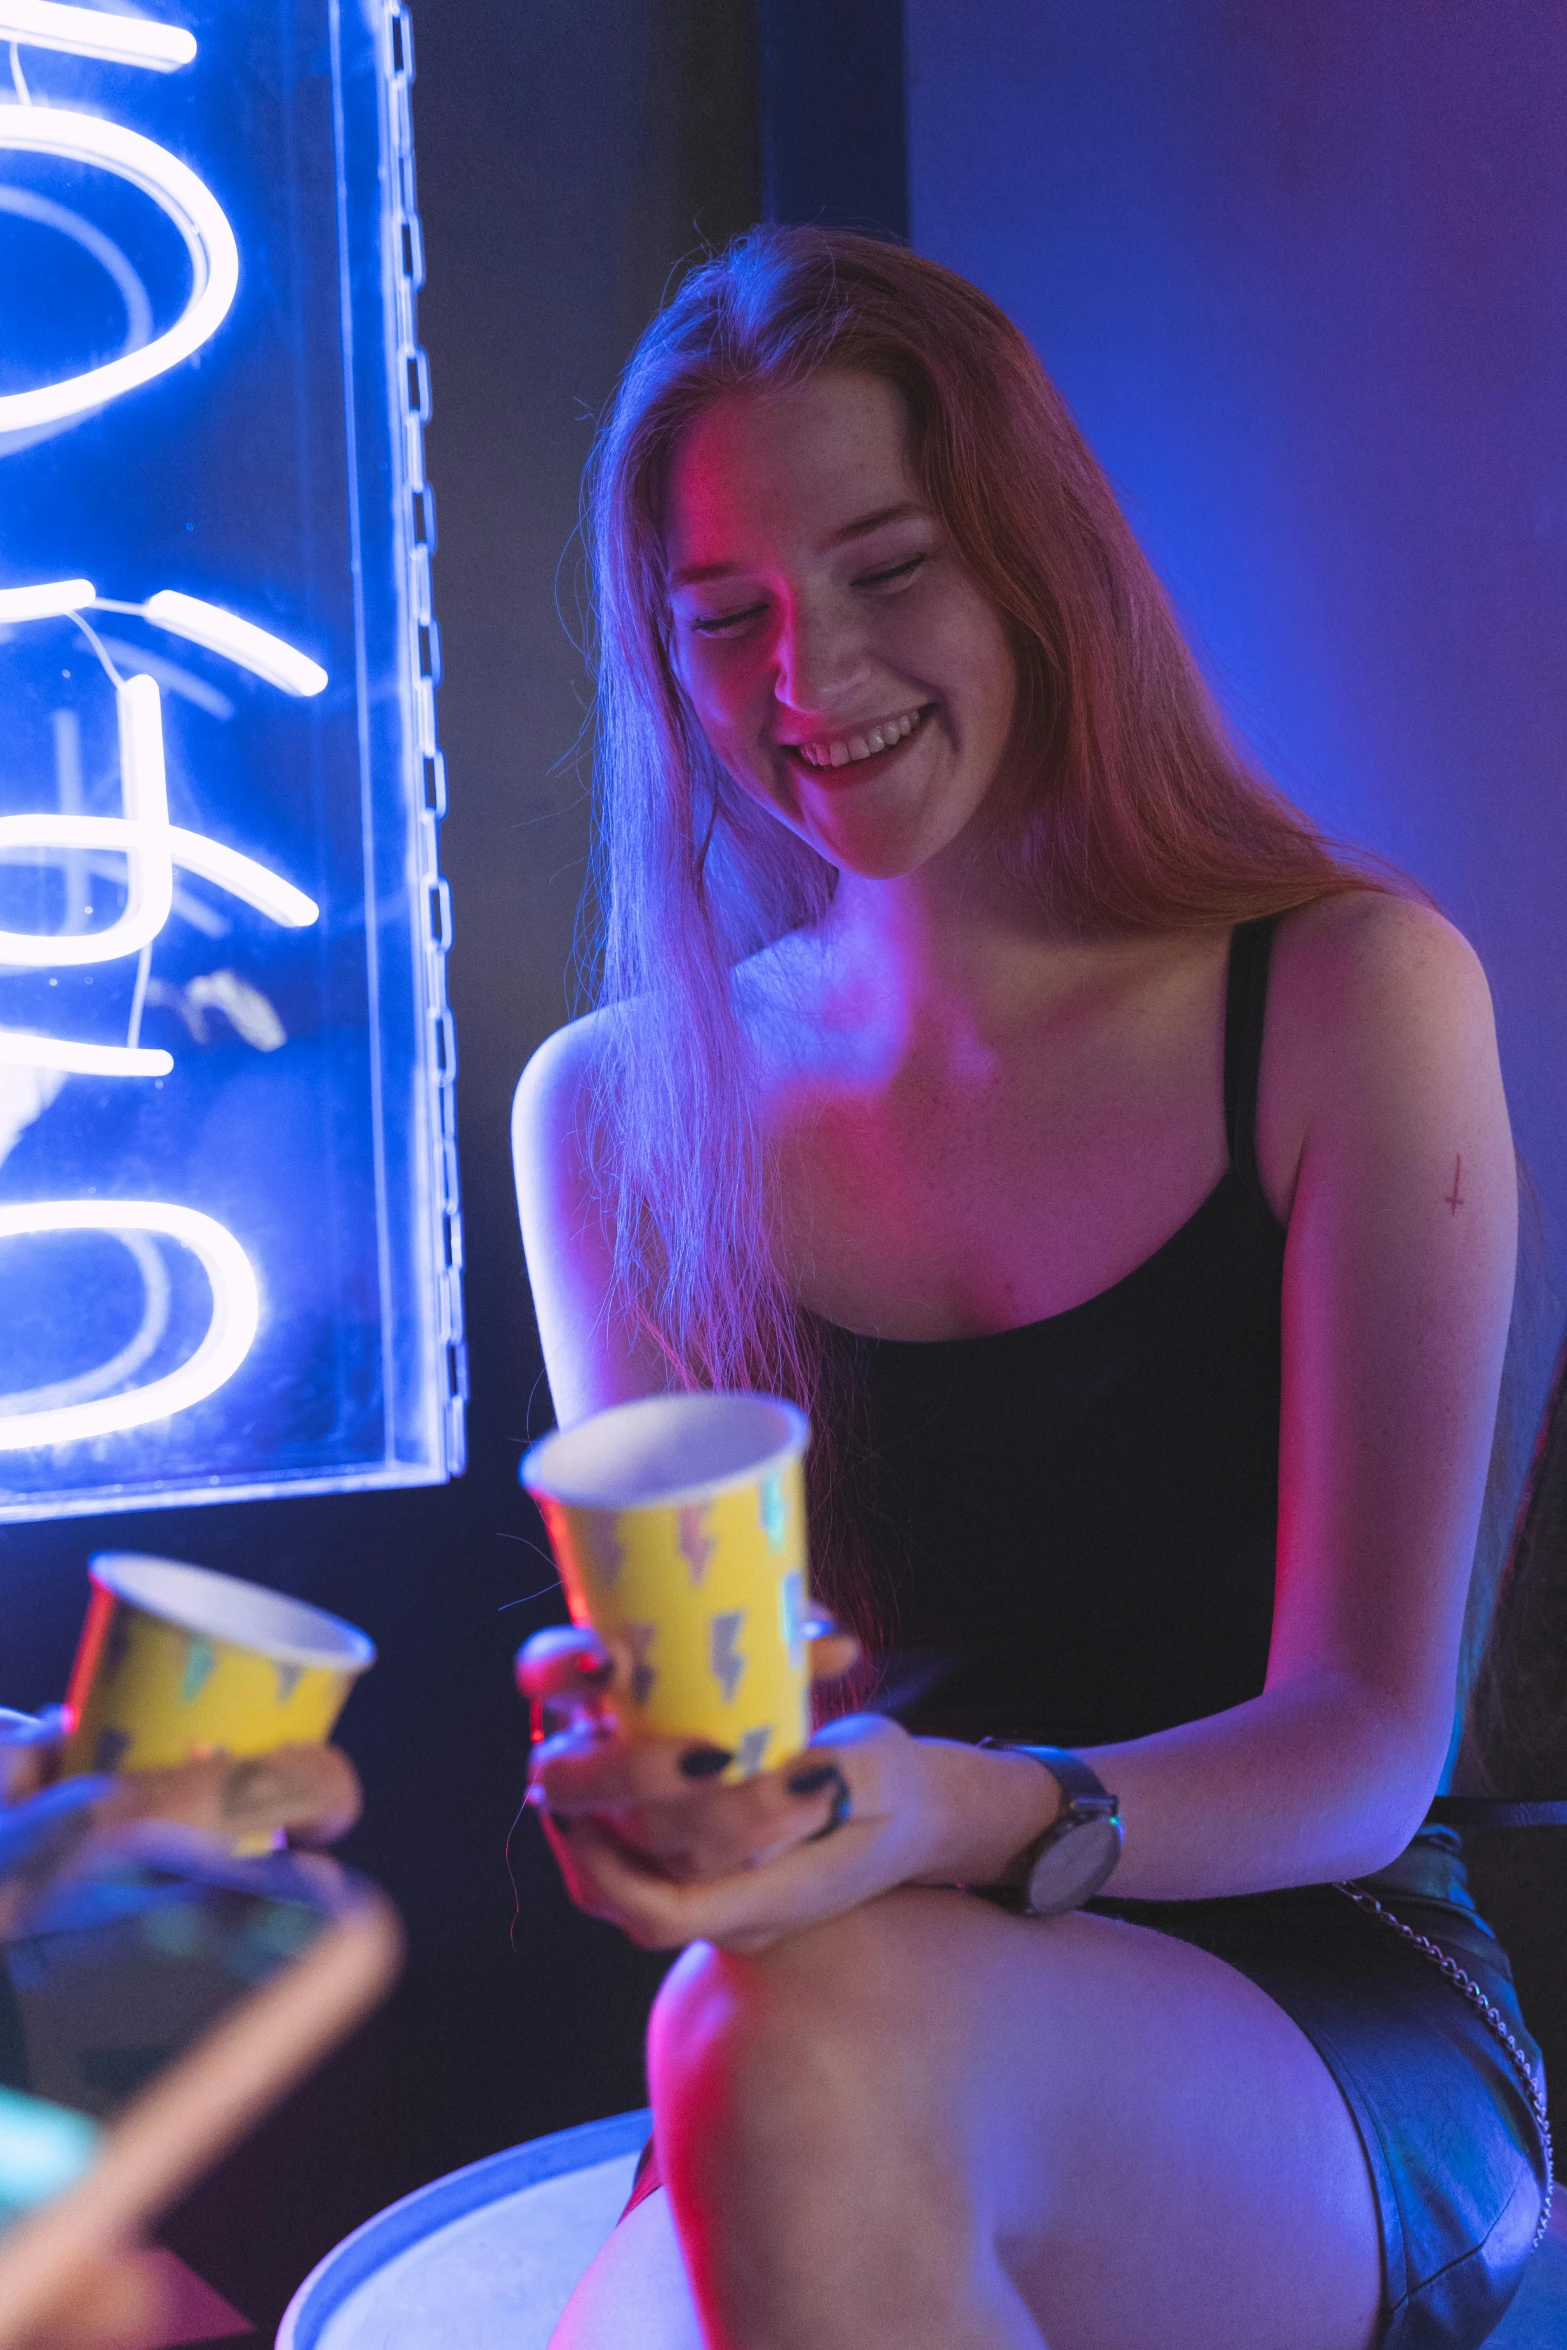 a woman sitting on a stool in front of a neon sign, by Adam Marczyński, trending on reddit, cups and balls, college party, smiling playfully, avatar image